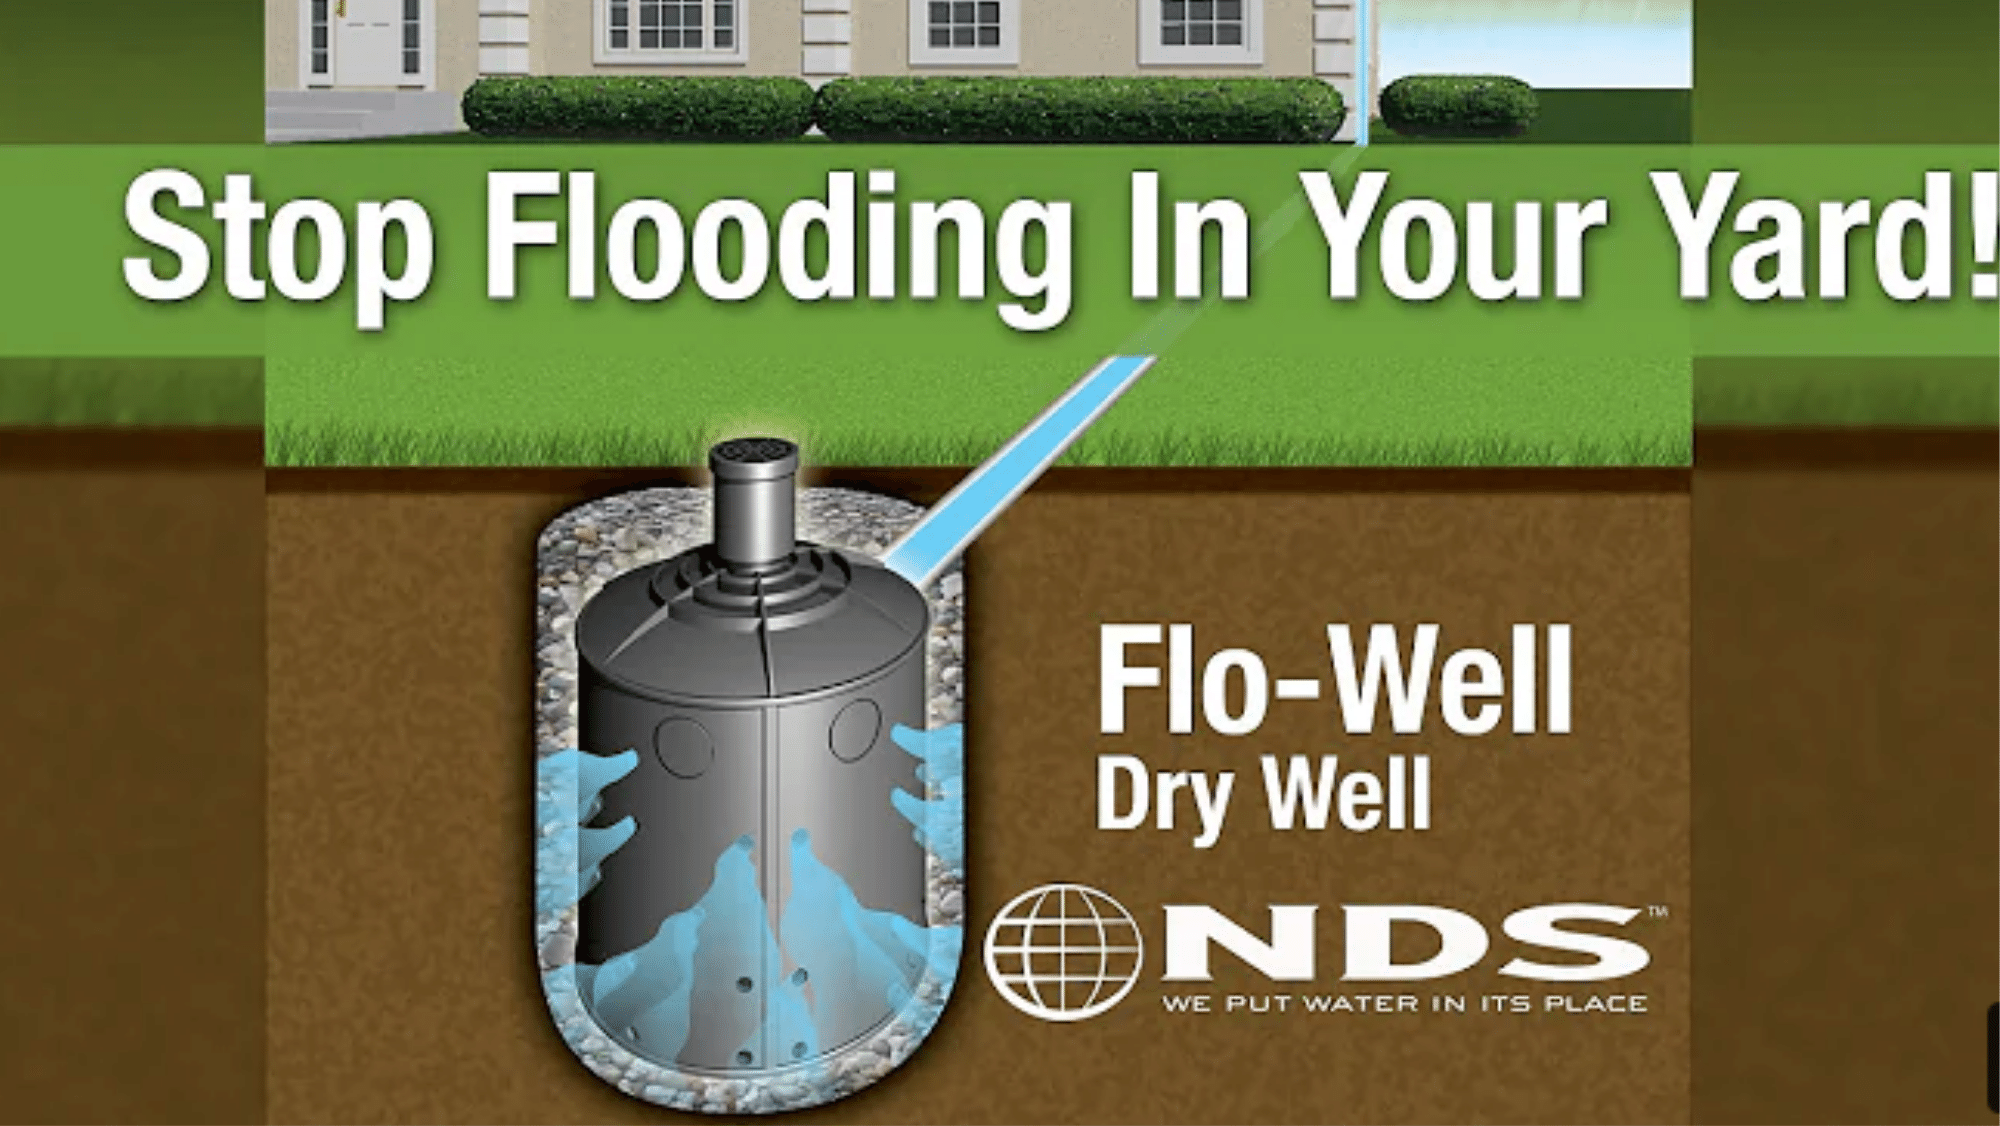 How to install NDS FloWell dry well drainage system